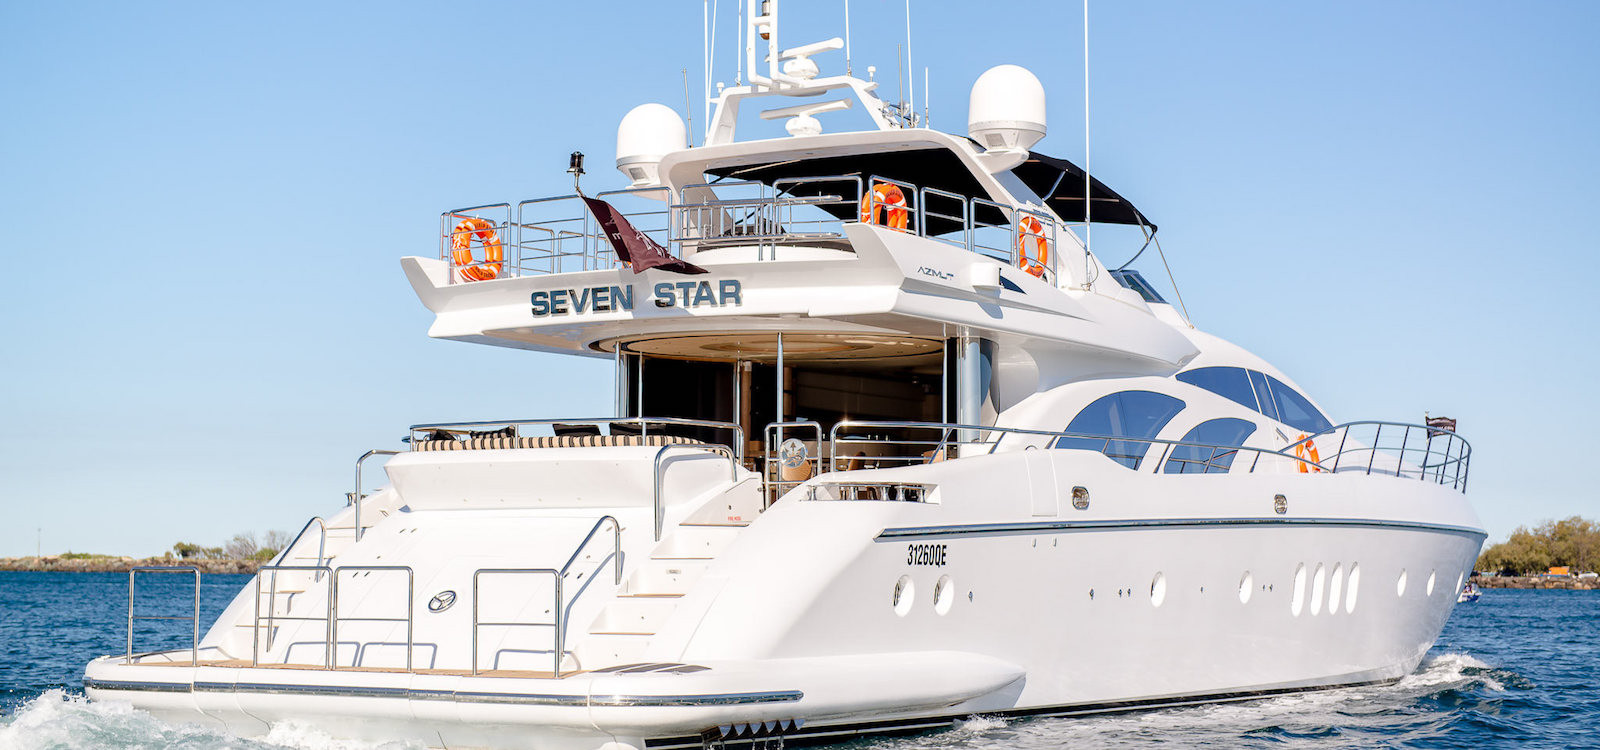 Stern view of luxury boat hire on Seven Star